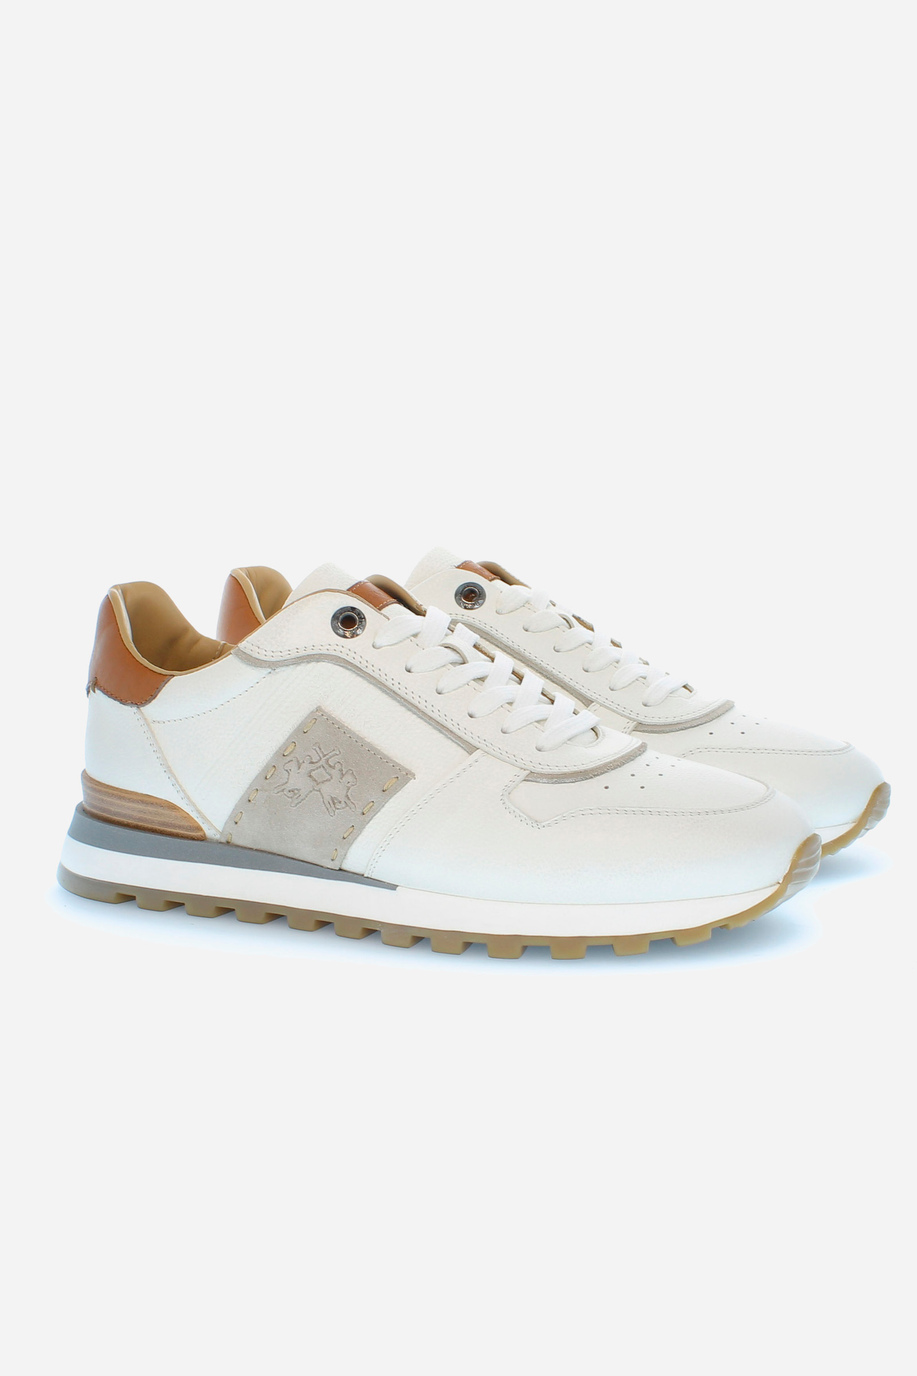 Leather trainers - BP + BR + CC (all seasons - never on sale) | La Martina - Official Online Shop